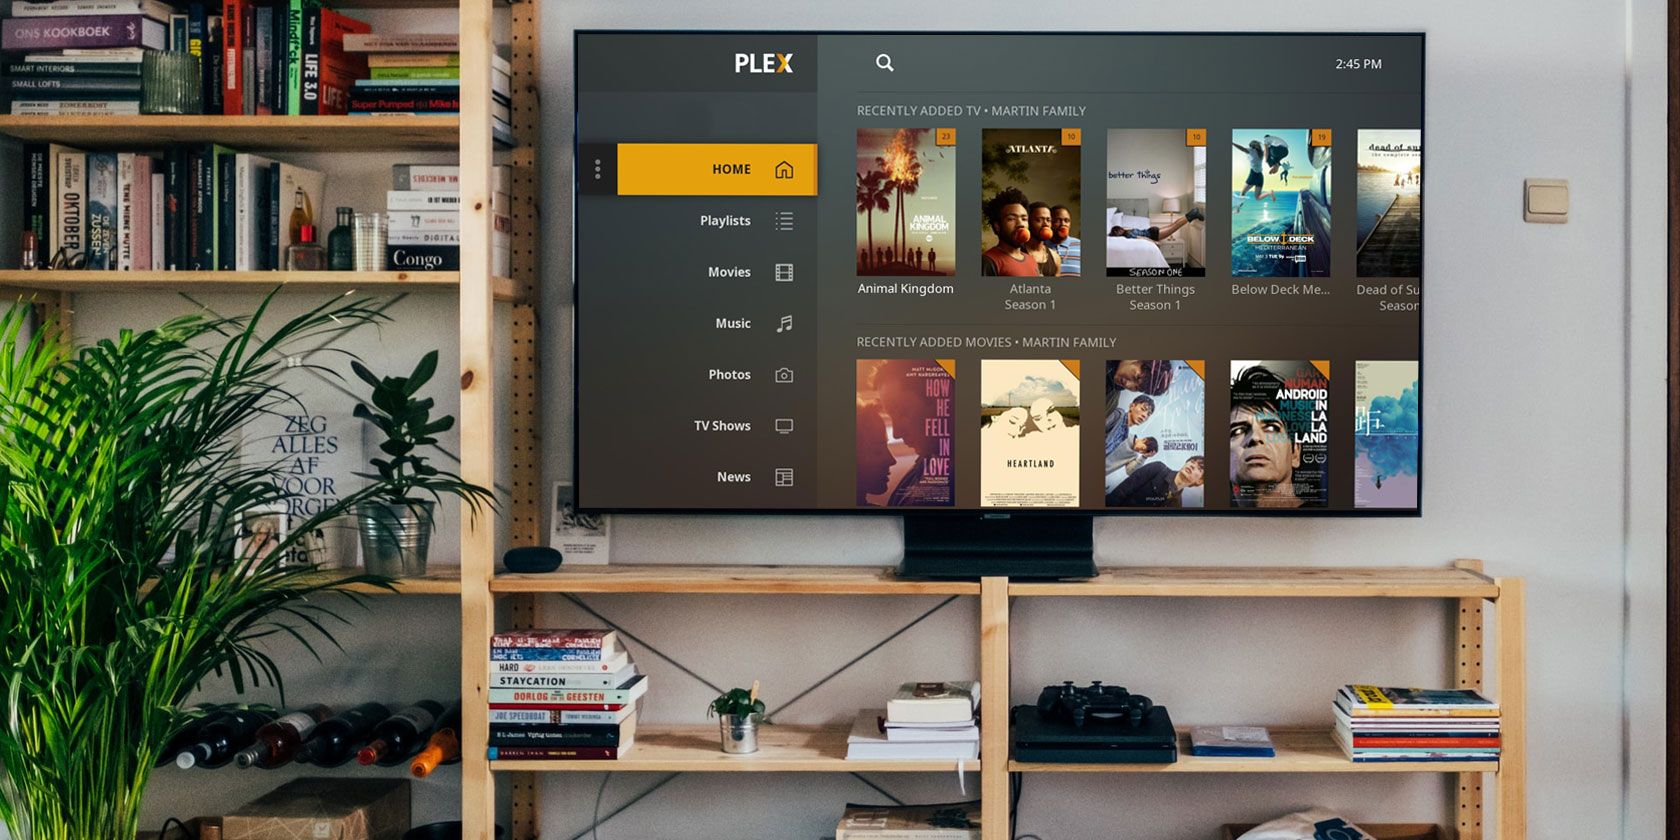 What Is Plex Video-on-Demand? Everything You Need to Know